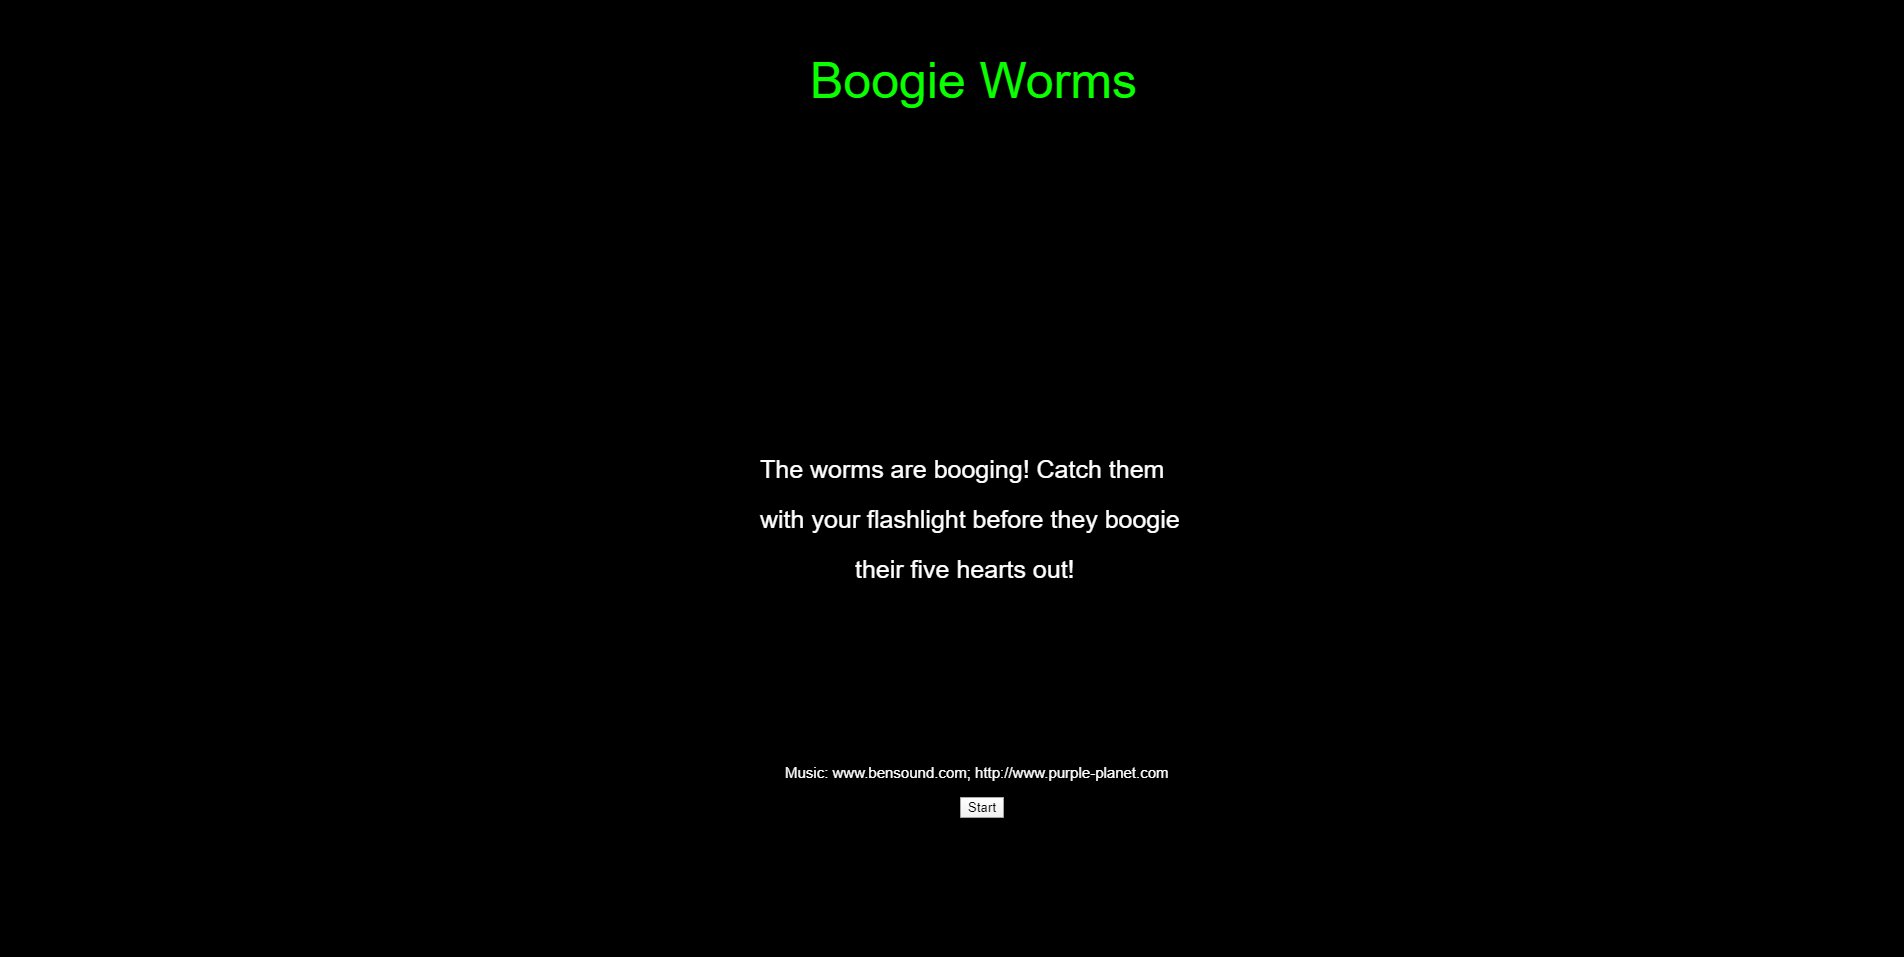 Boogie Worms starting screen